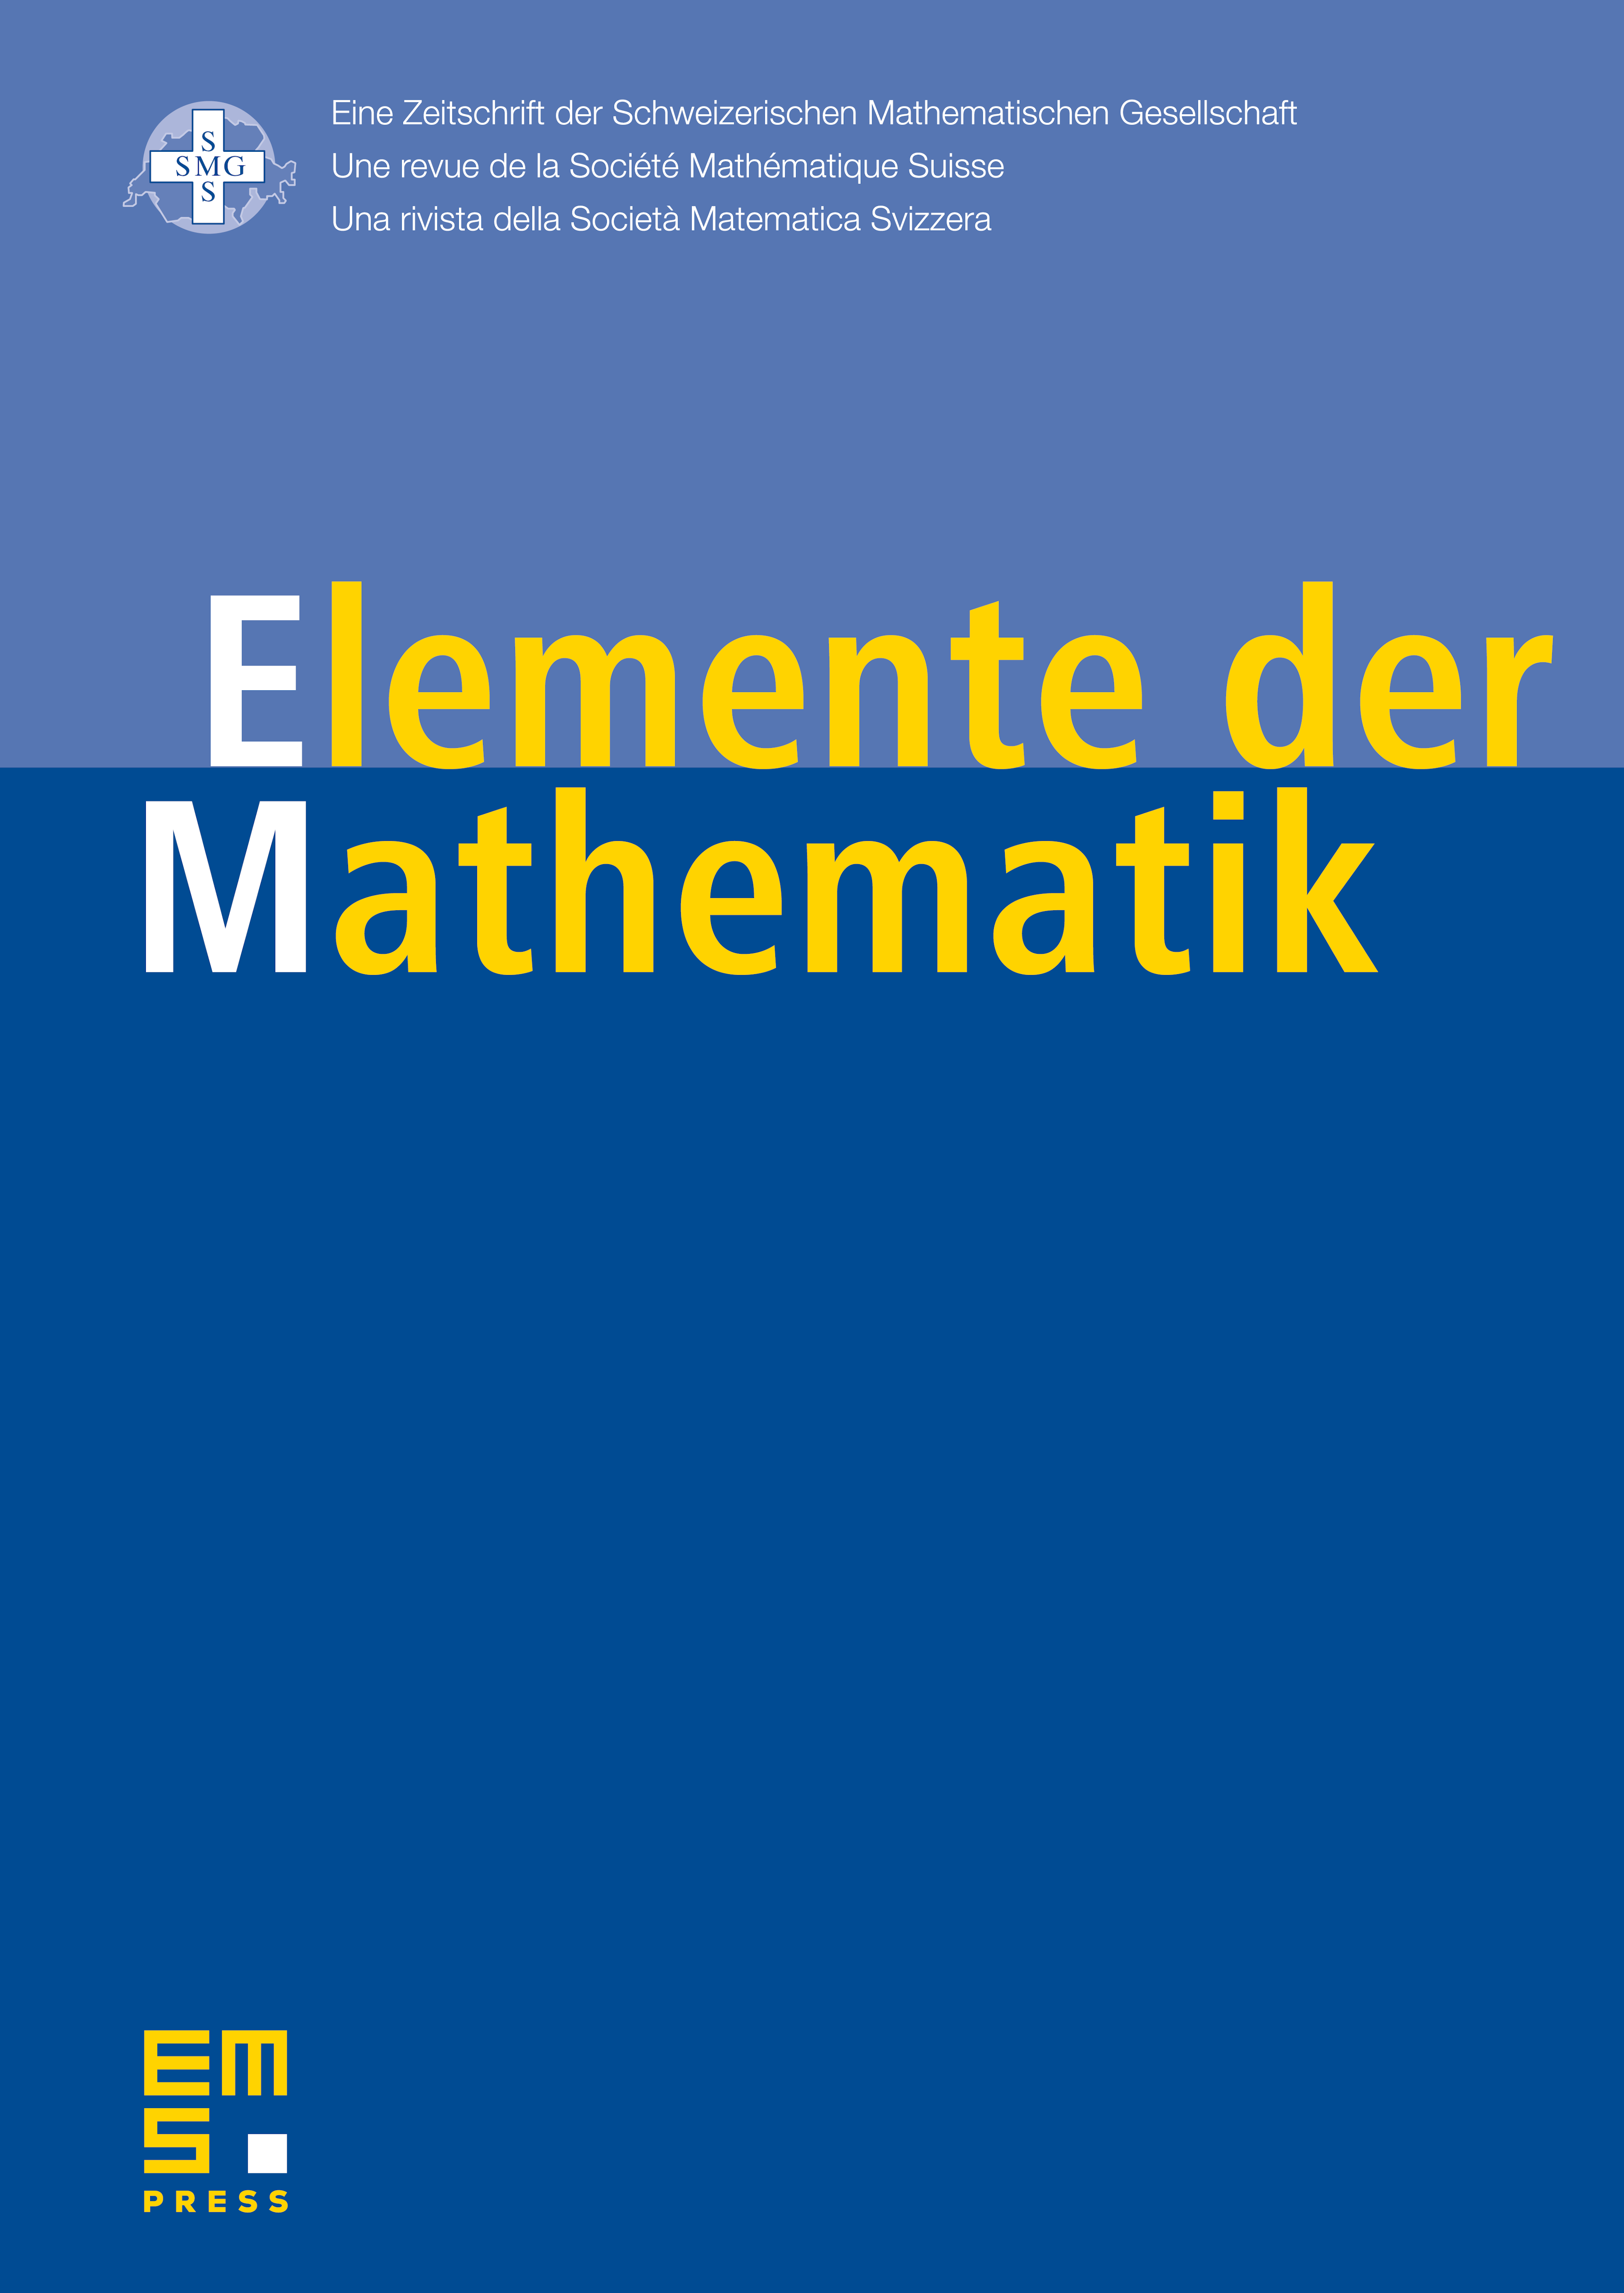 Two statements characterizing the Euclidean metric of a metric plane cover